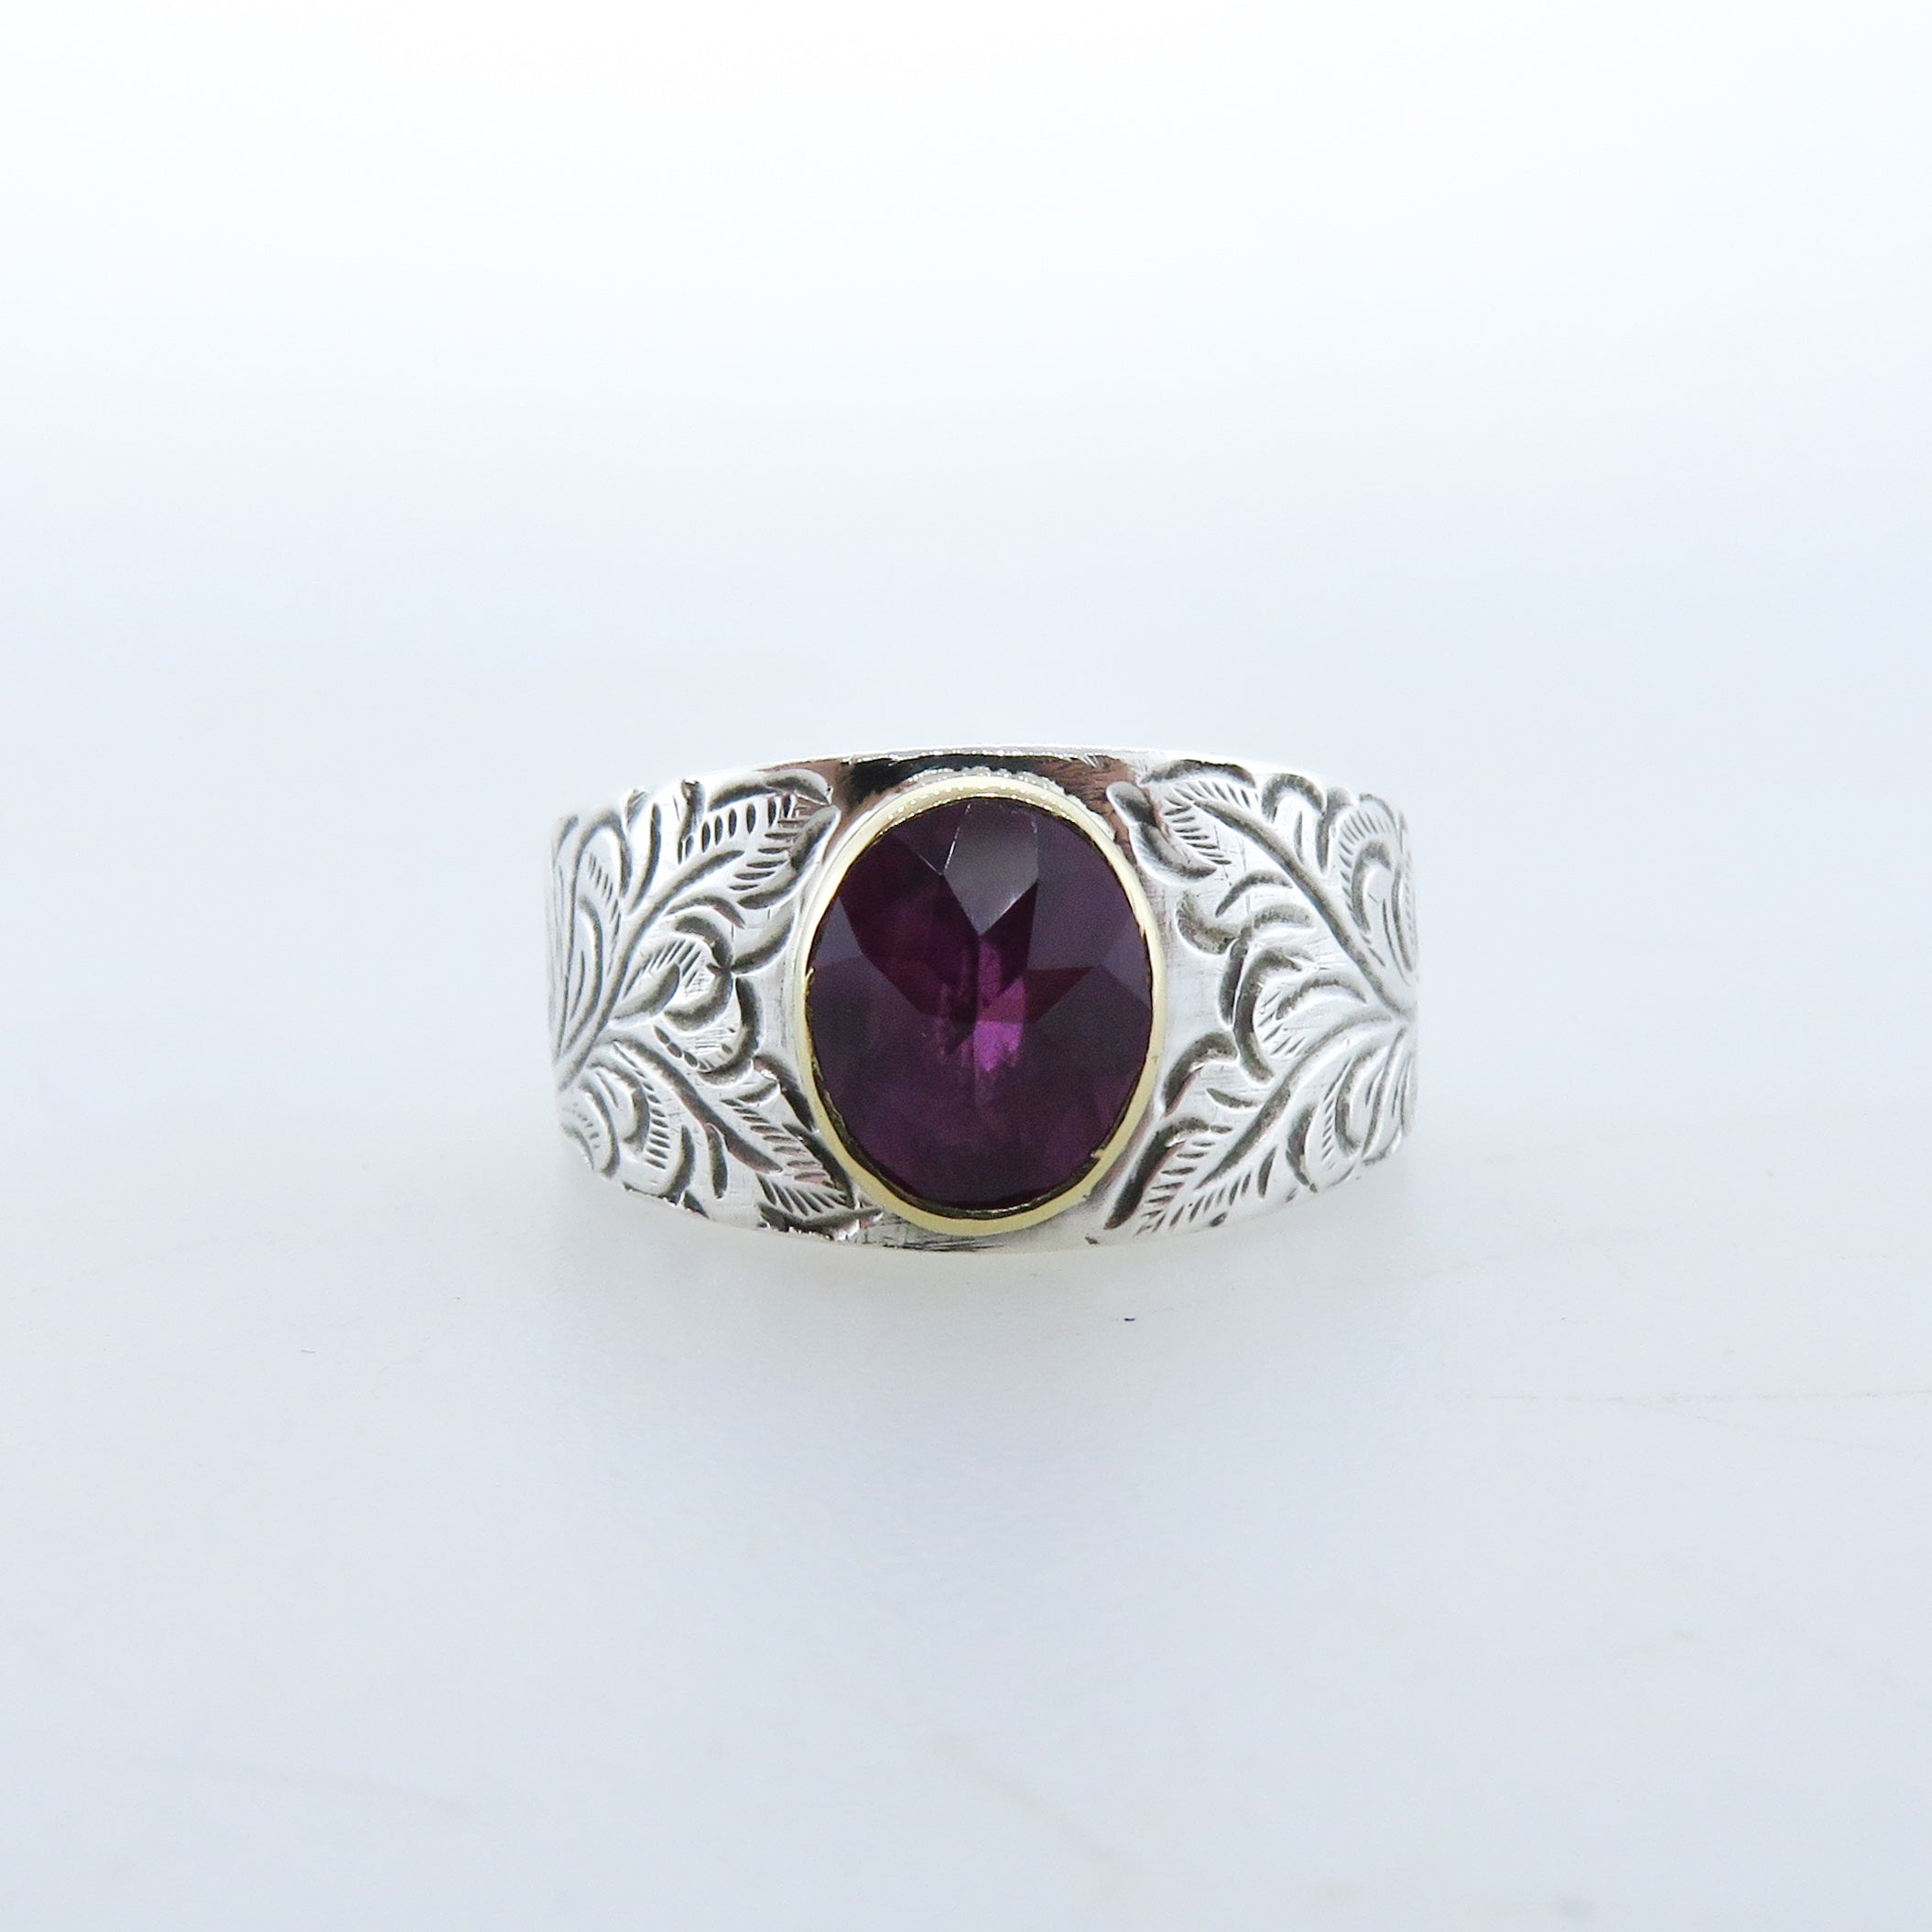 Pink Tourmaline Sterling Silver Ring with 18k Gold